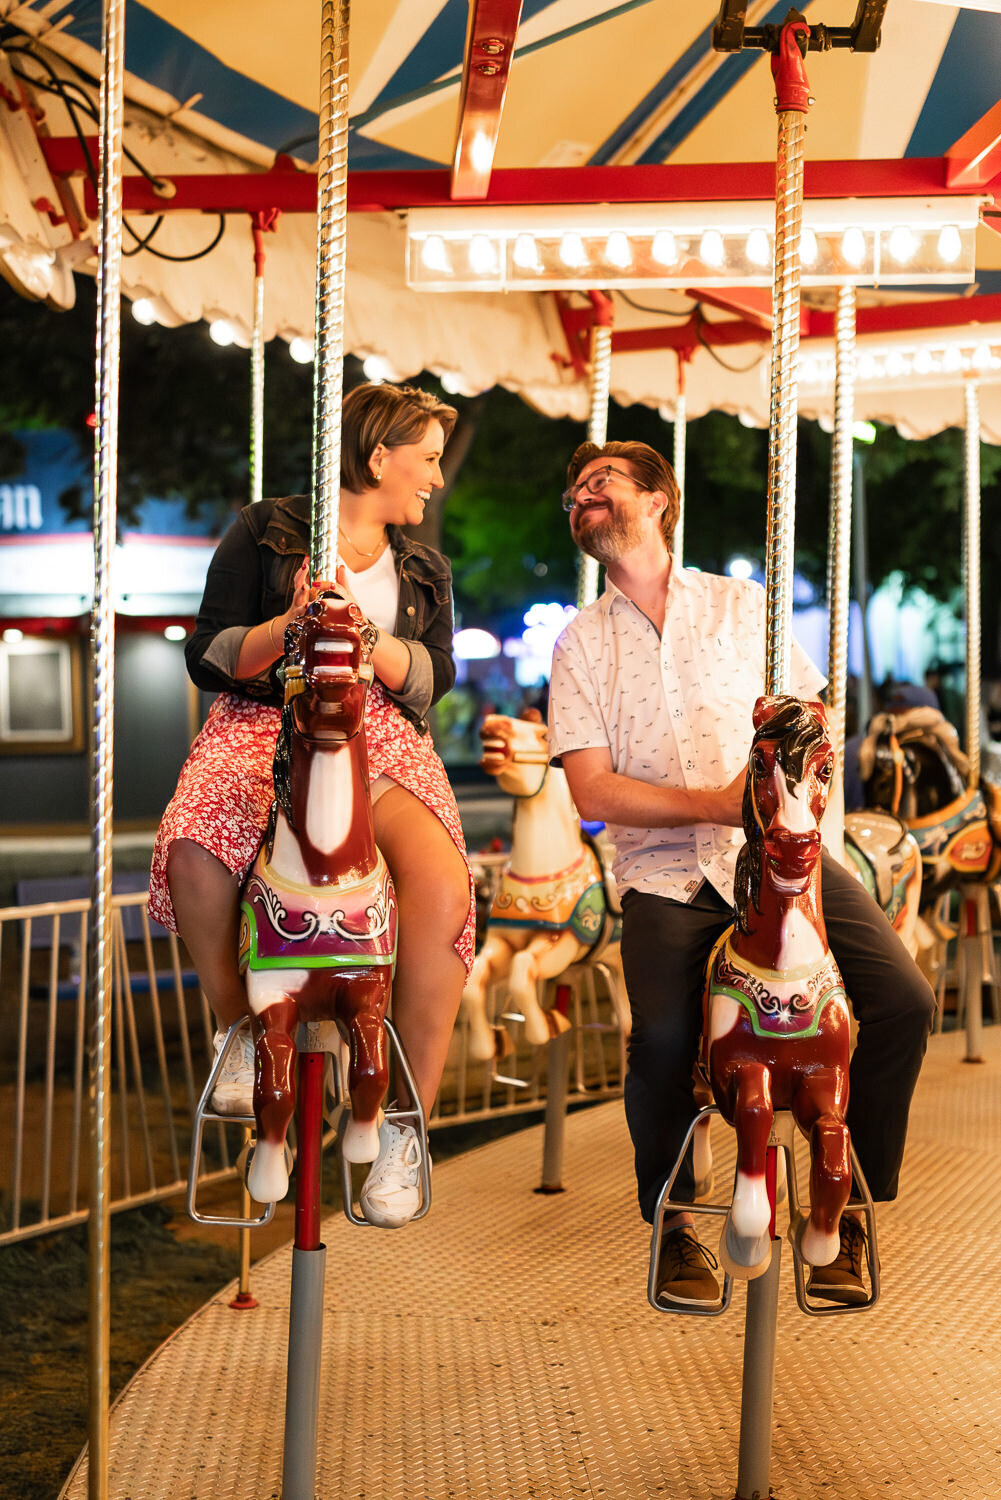 Man and woman ride the carousel at the Minnesota State Fair at night.